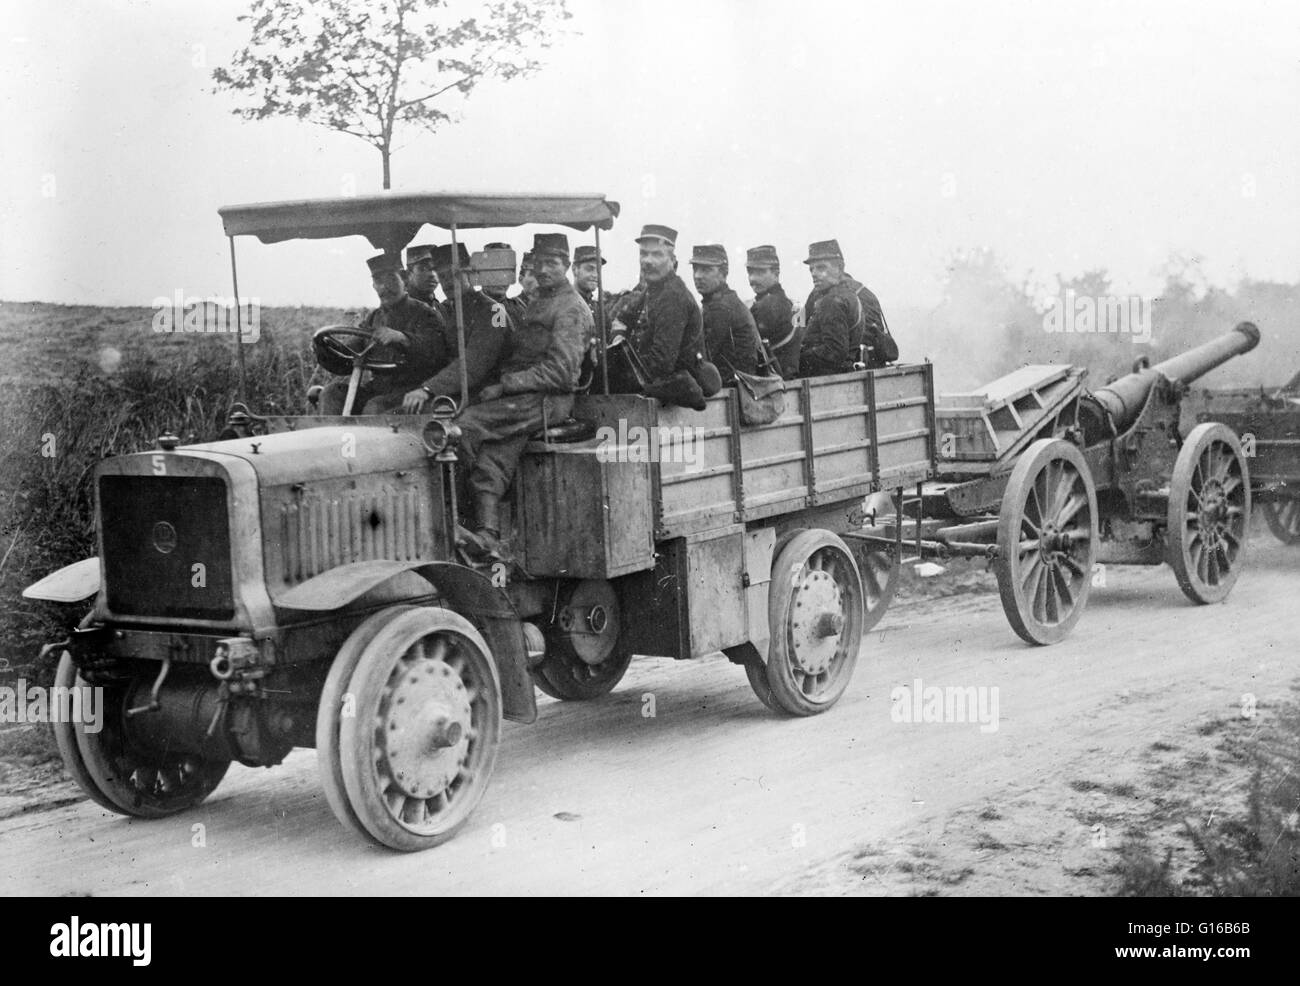 French soldiers in motor tractor which is pulling a large gun along the road at the beginning of World War I. Siege artillery were heavy guns and other bombardment devices designed to bombard fortifications, cities, and other fixed targets. They were capa Stock Photo